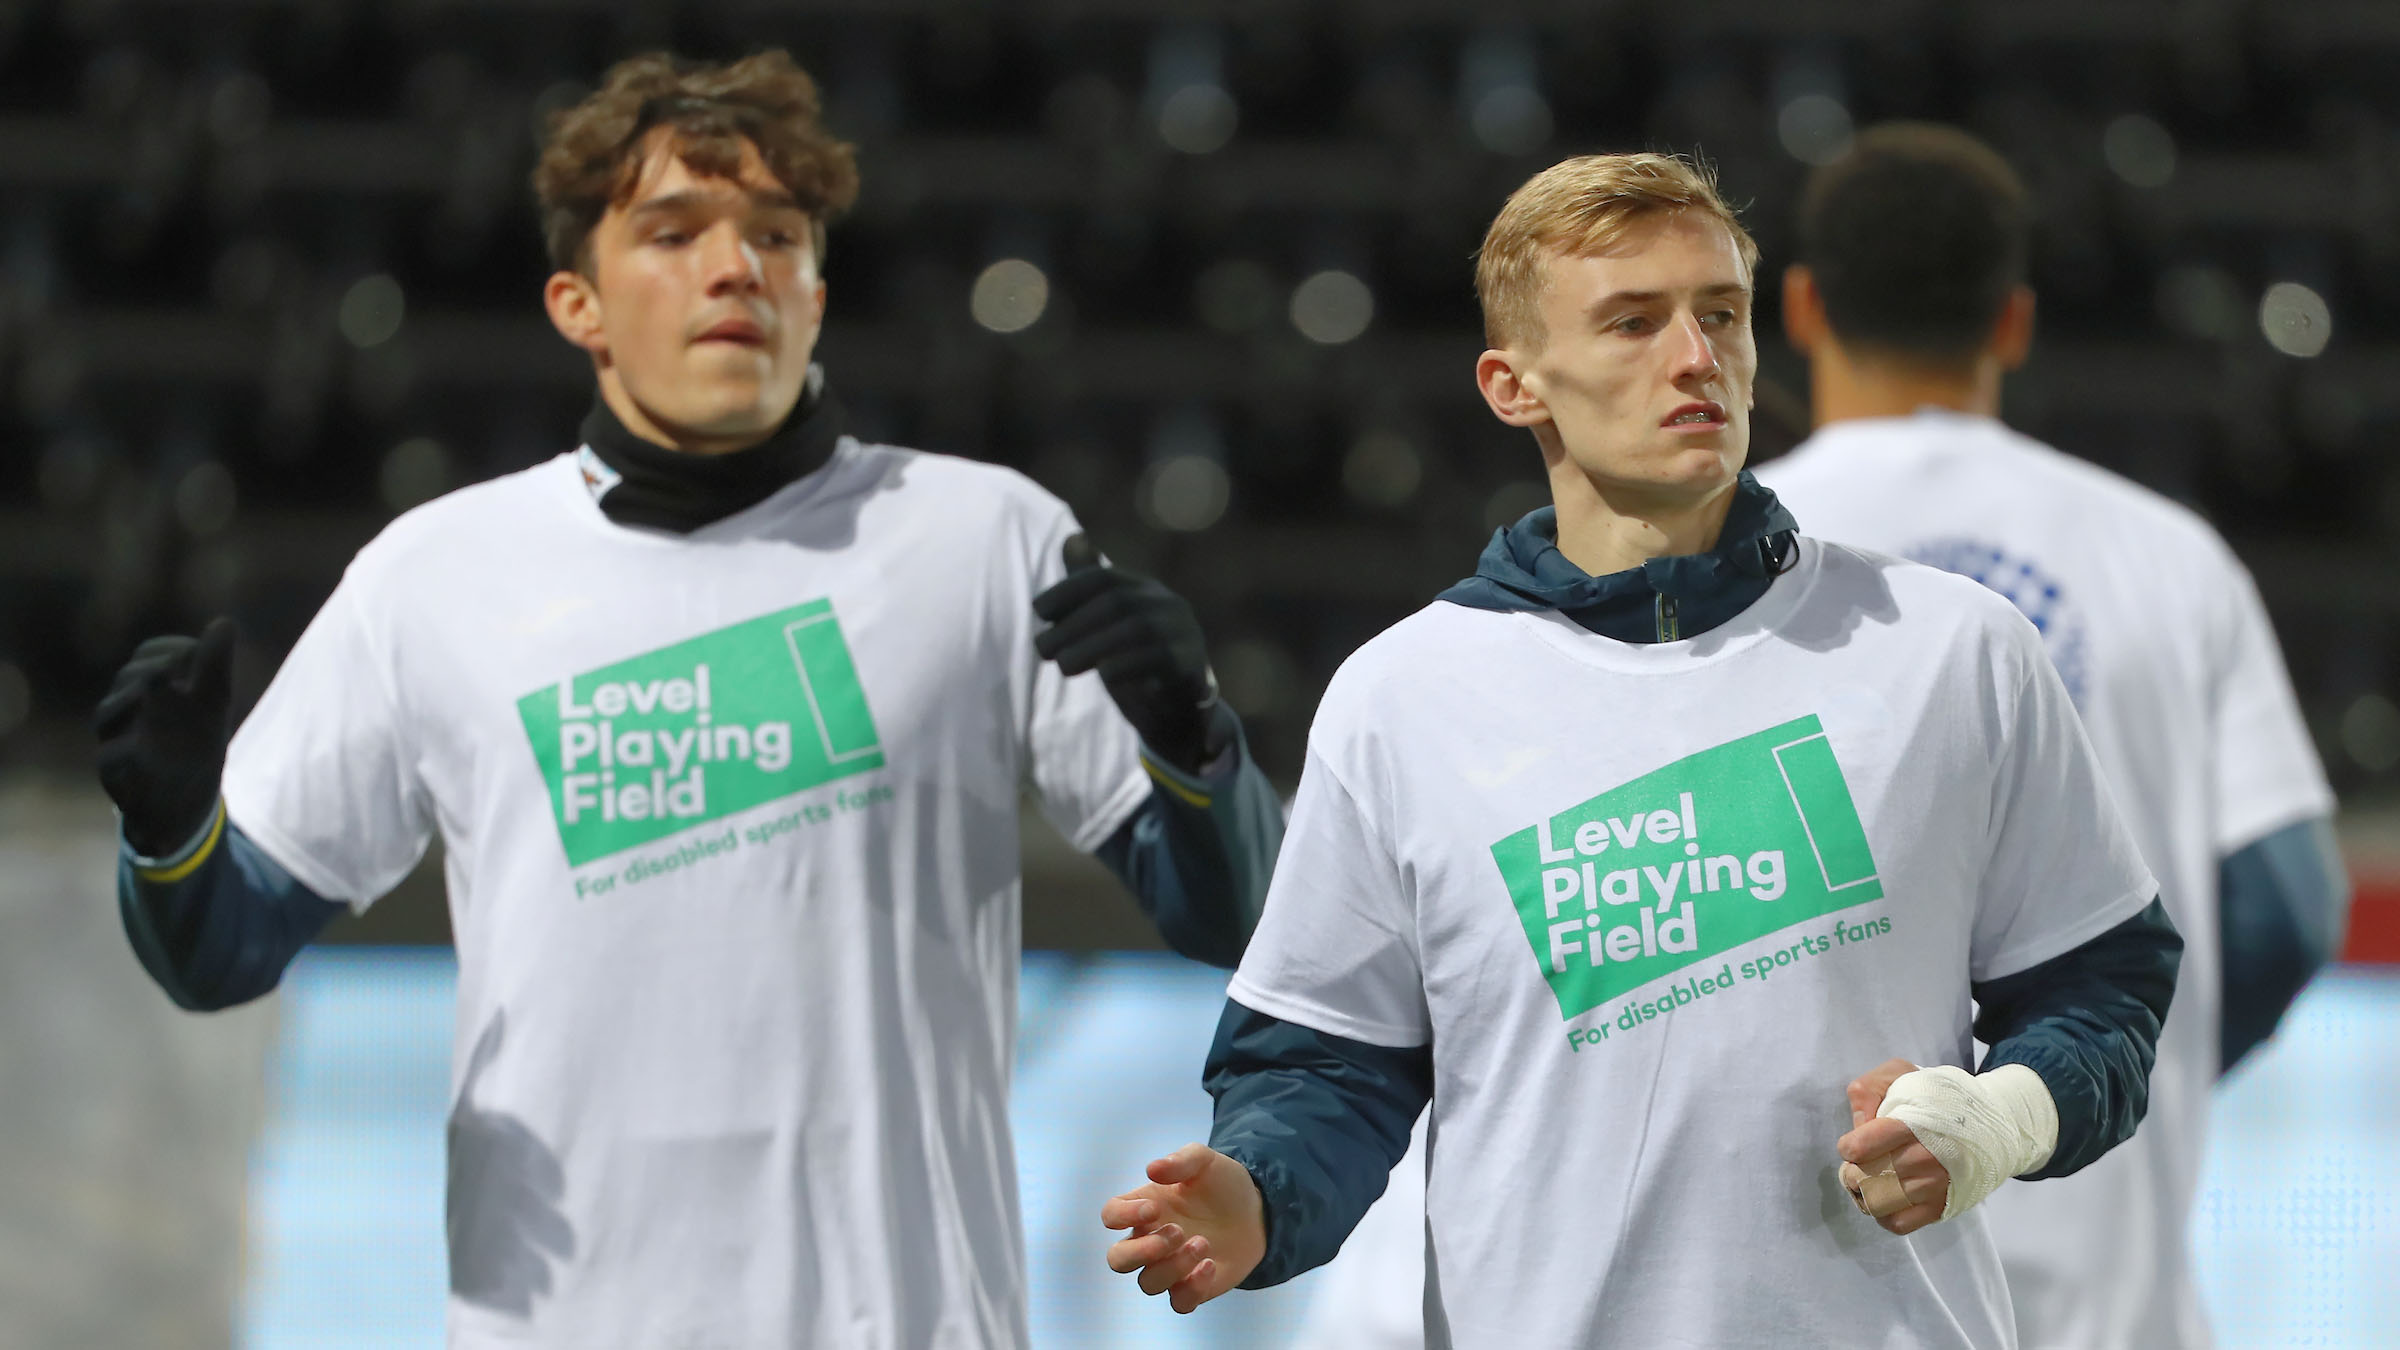 Players warm up in Level Playing Field t-shirts